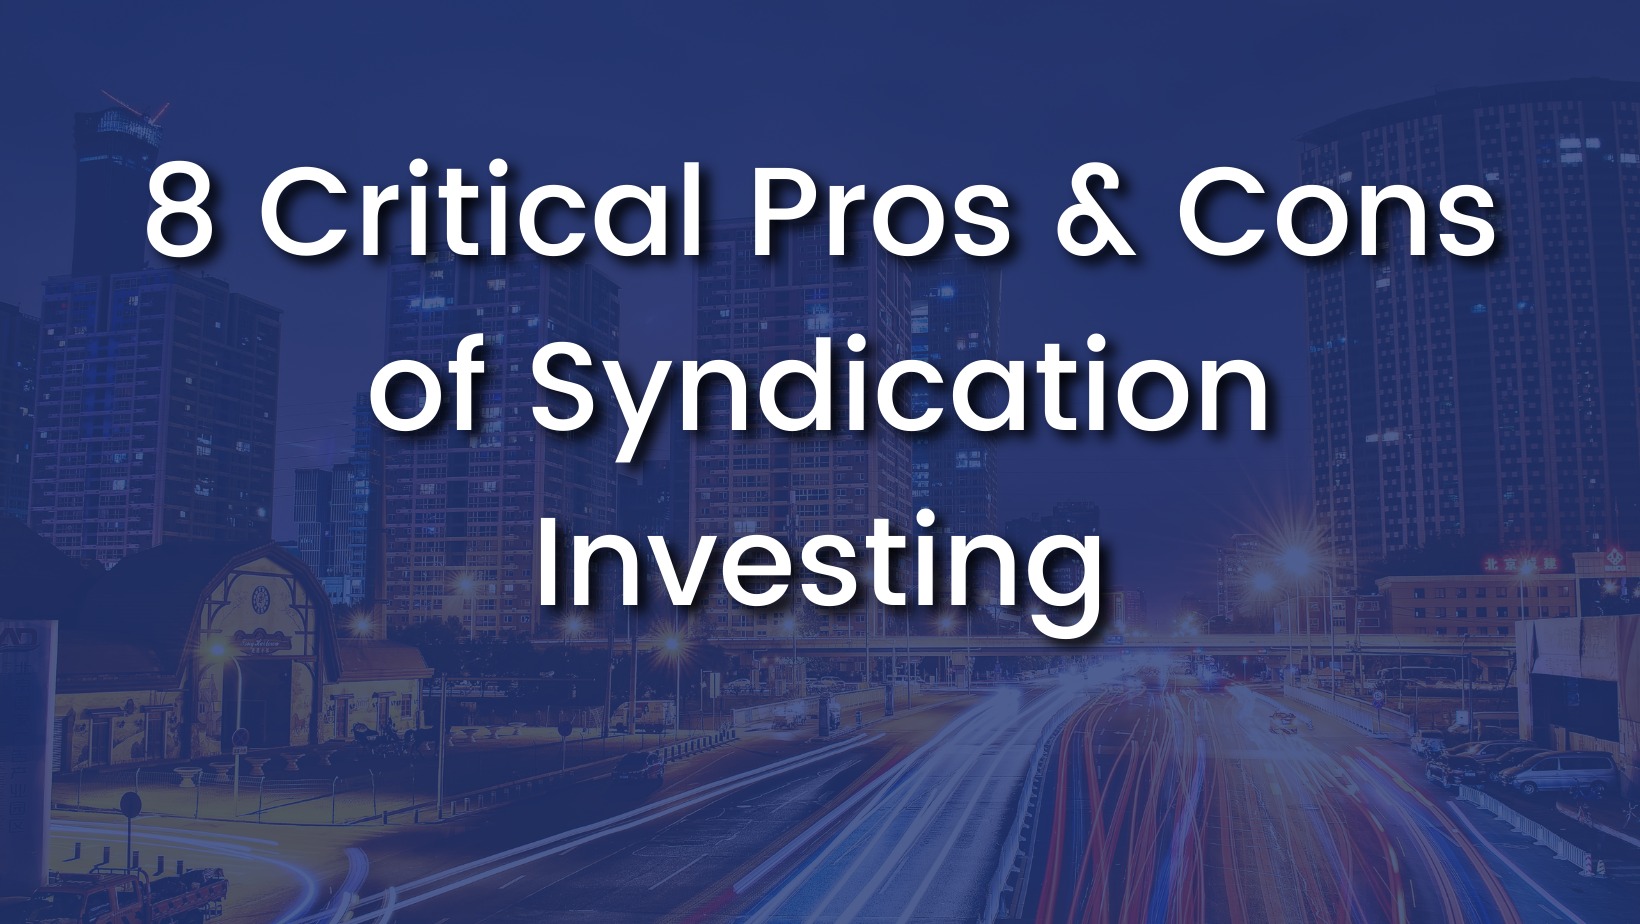 8 Critical Pros & Cons of Syndication Investing